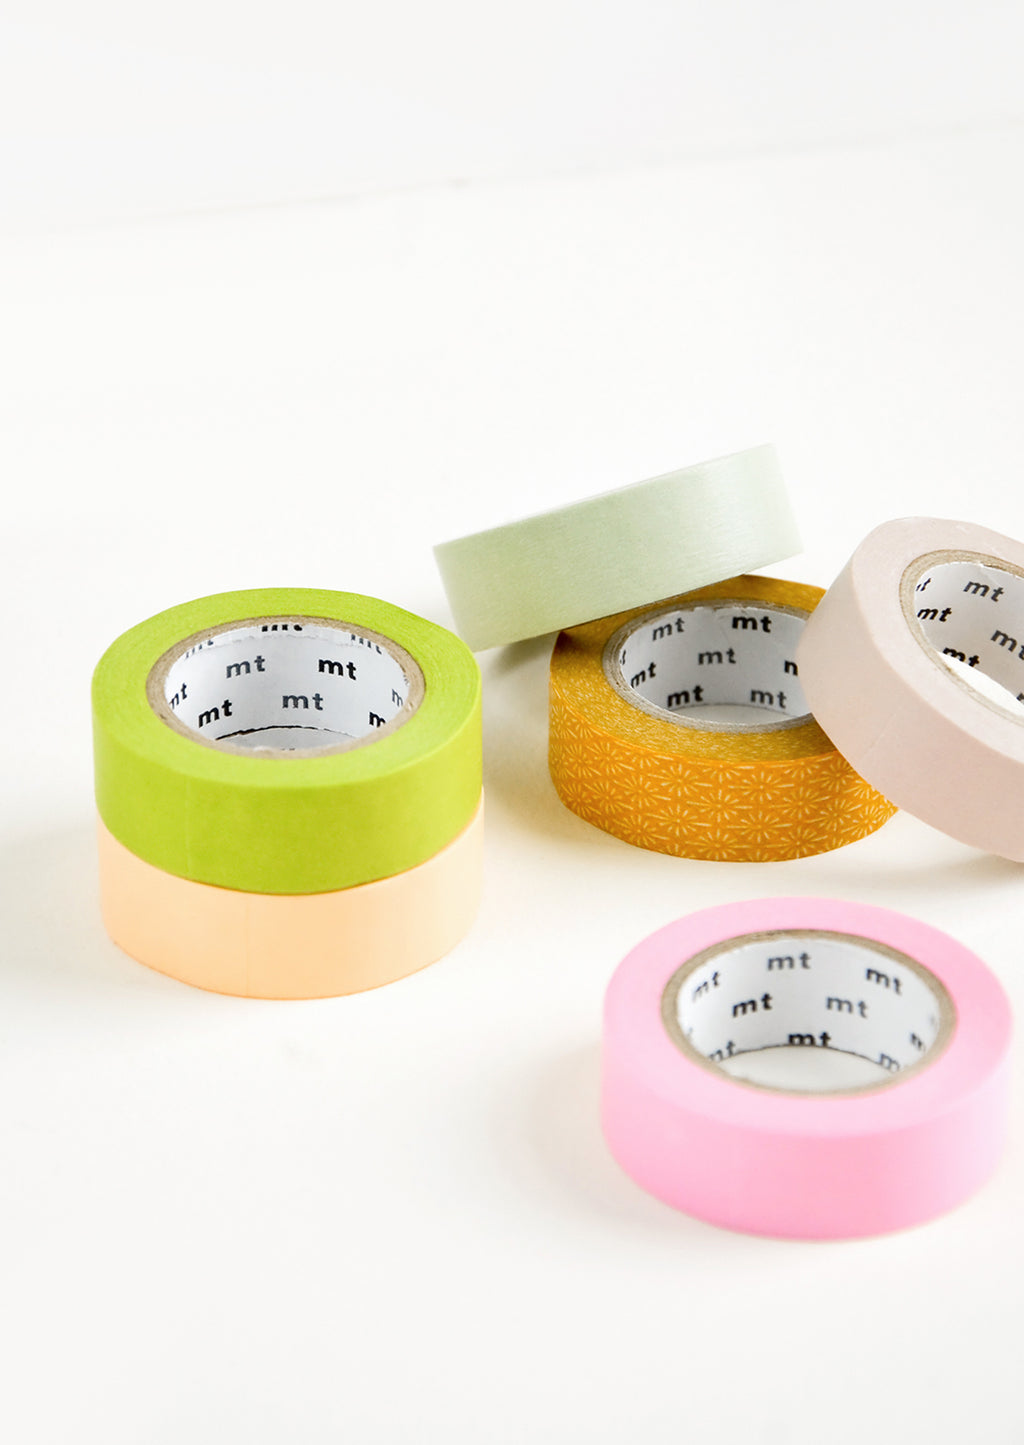 1: An assortment of washi tape rolls in a mix of colors and patterns.